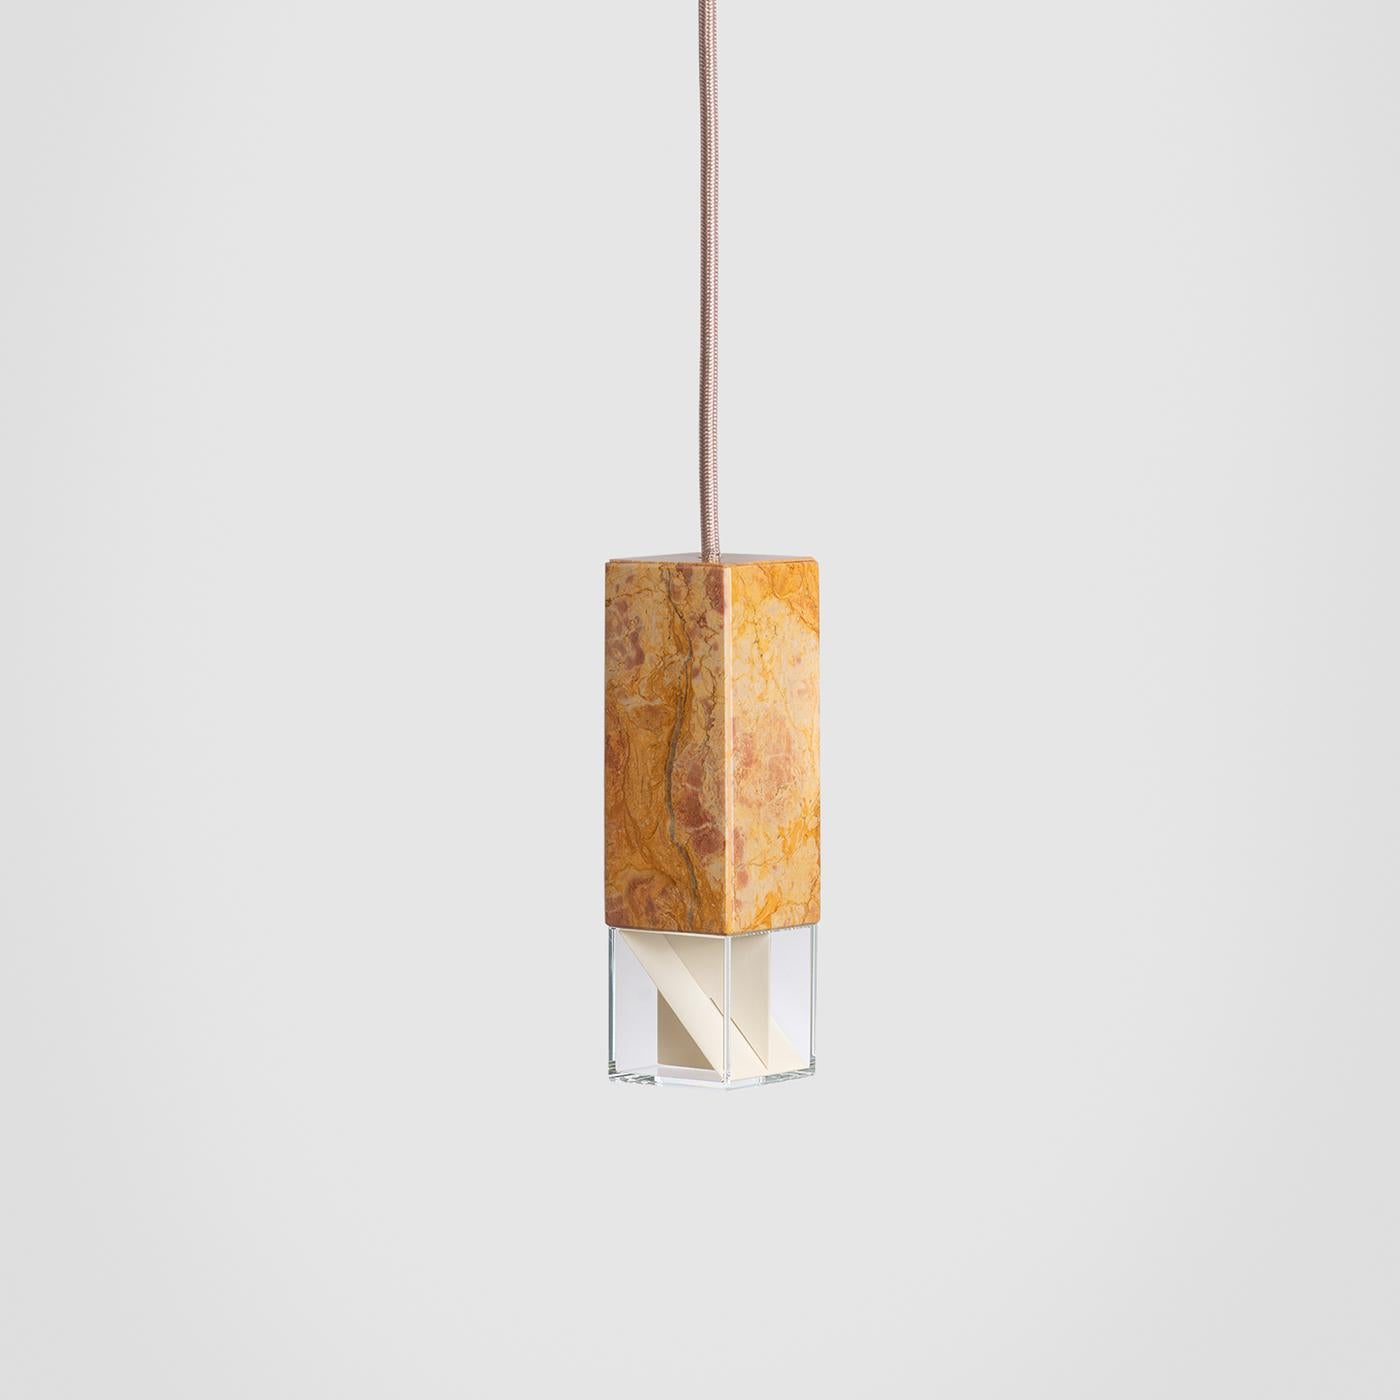 Part of a limited edition of pendant lamps featuring prized colored Italian marbles, this Lamp/One suspends a squared column of Royal Pink Yellow marble, sourced from Verona, with a crystal glass diffuser and extra-thin Limoges porcelain sheets that